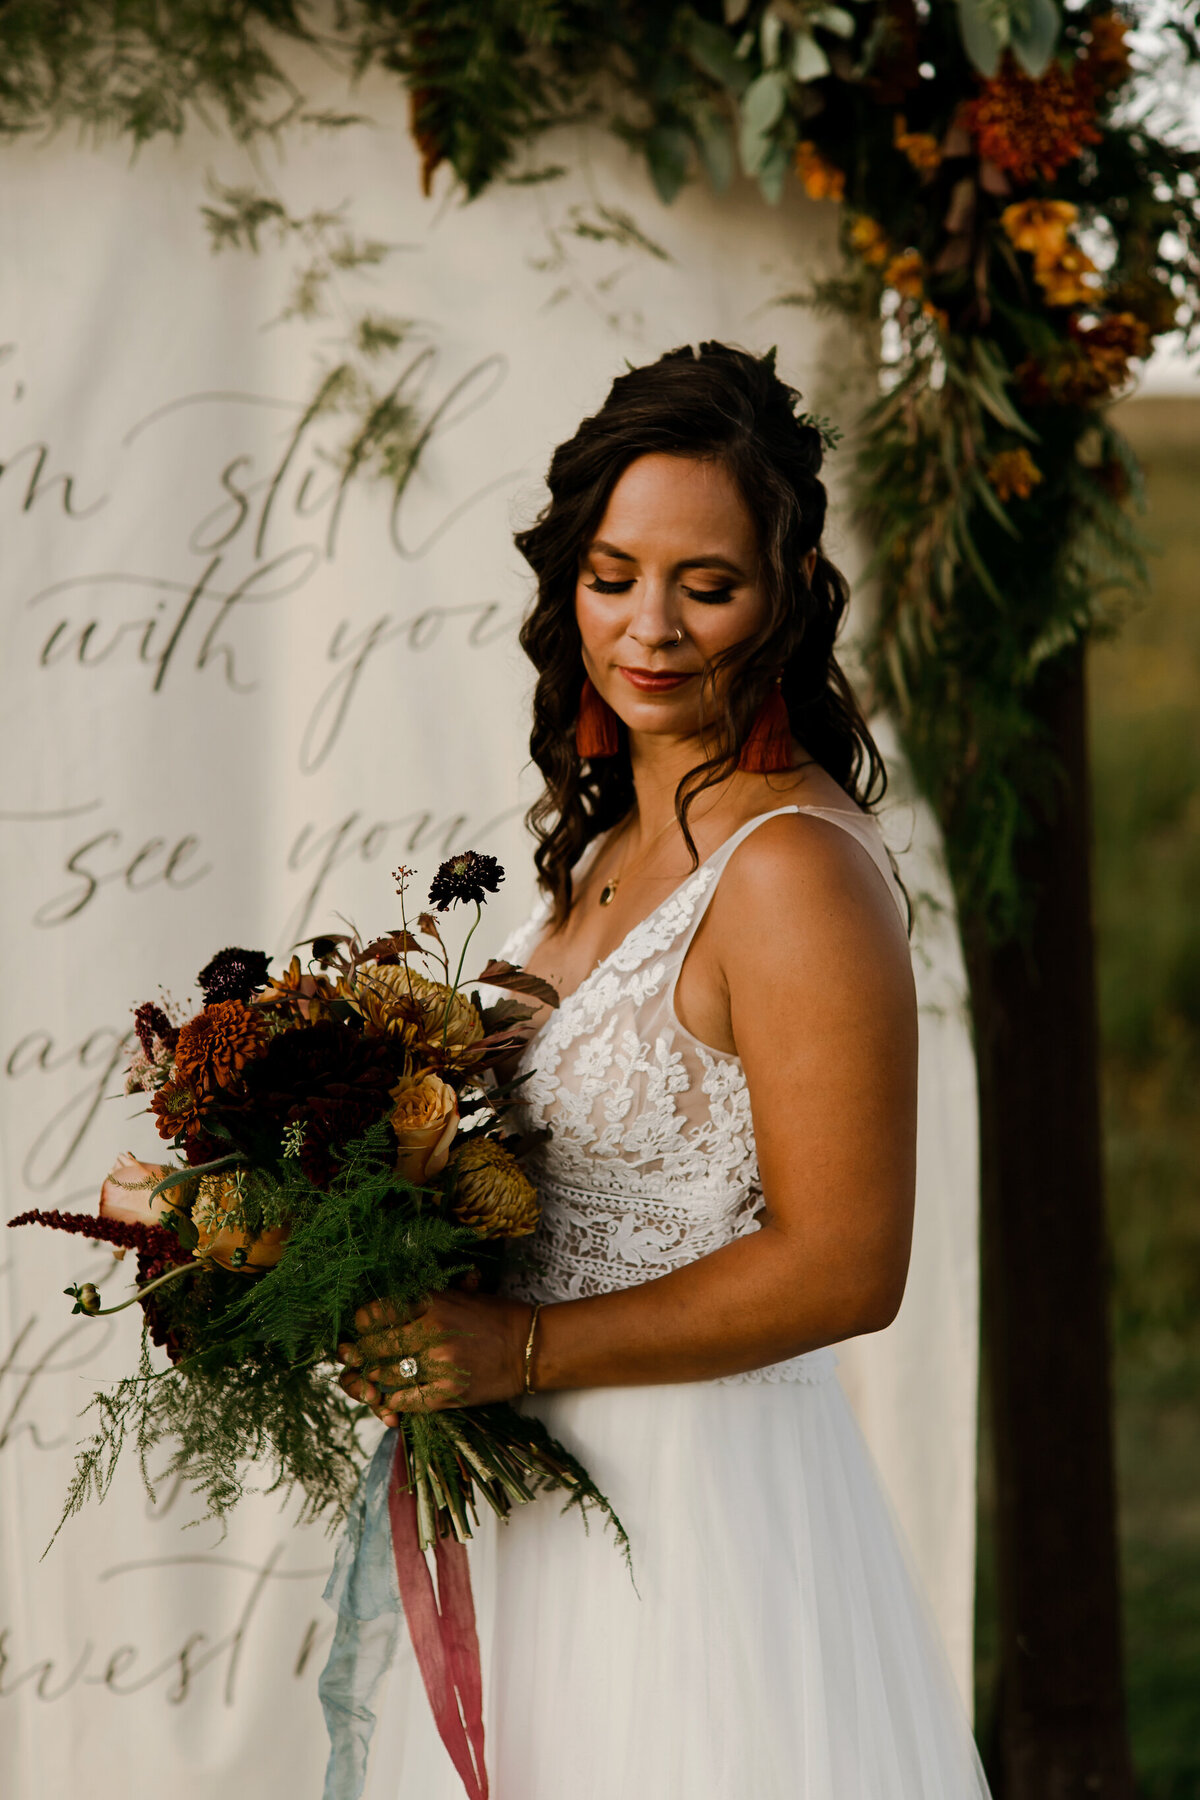 floral-and-field-design-bespoke-wedding-floral-styling-calgary-alberta-harvest-moon-20